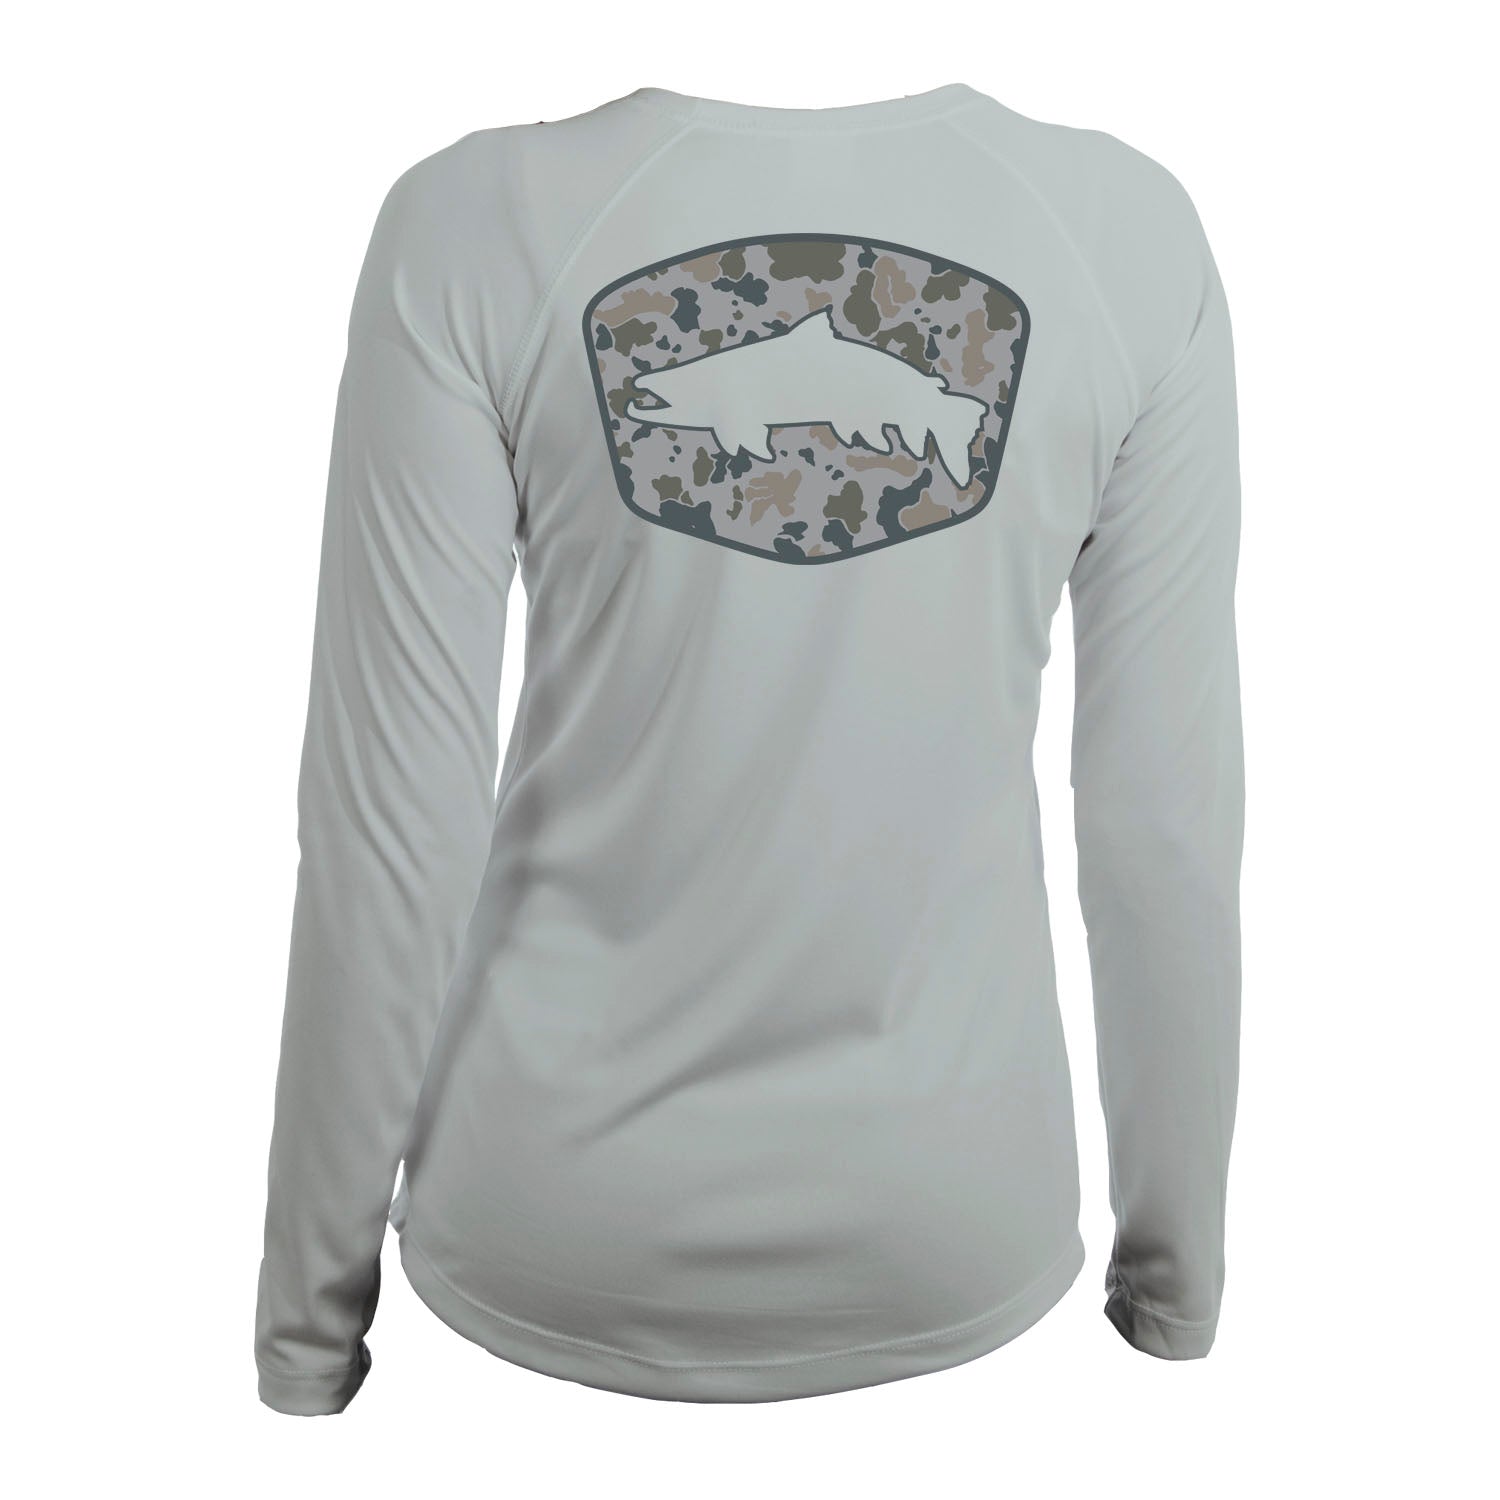 A gray long sleeved shirt with a trout silhouette inside a badge filled with camo pattern